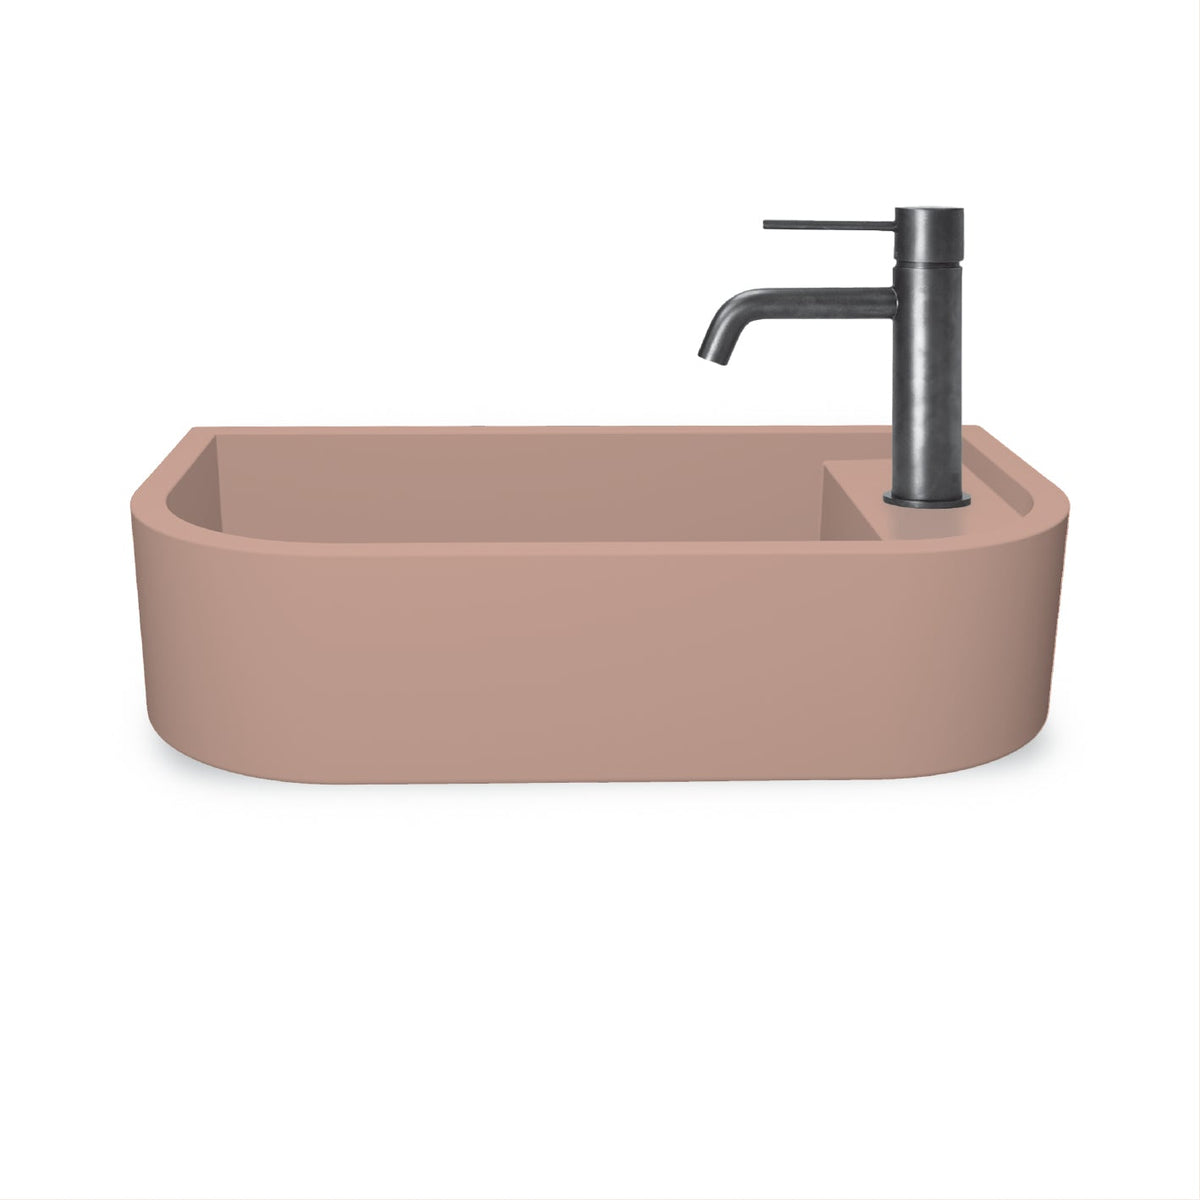 Loop 02 Basin - Overflow - Wall Hung (Blush Pink,Tap Hole,Chrome)